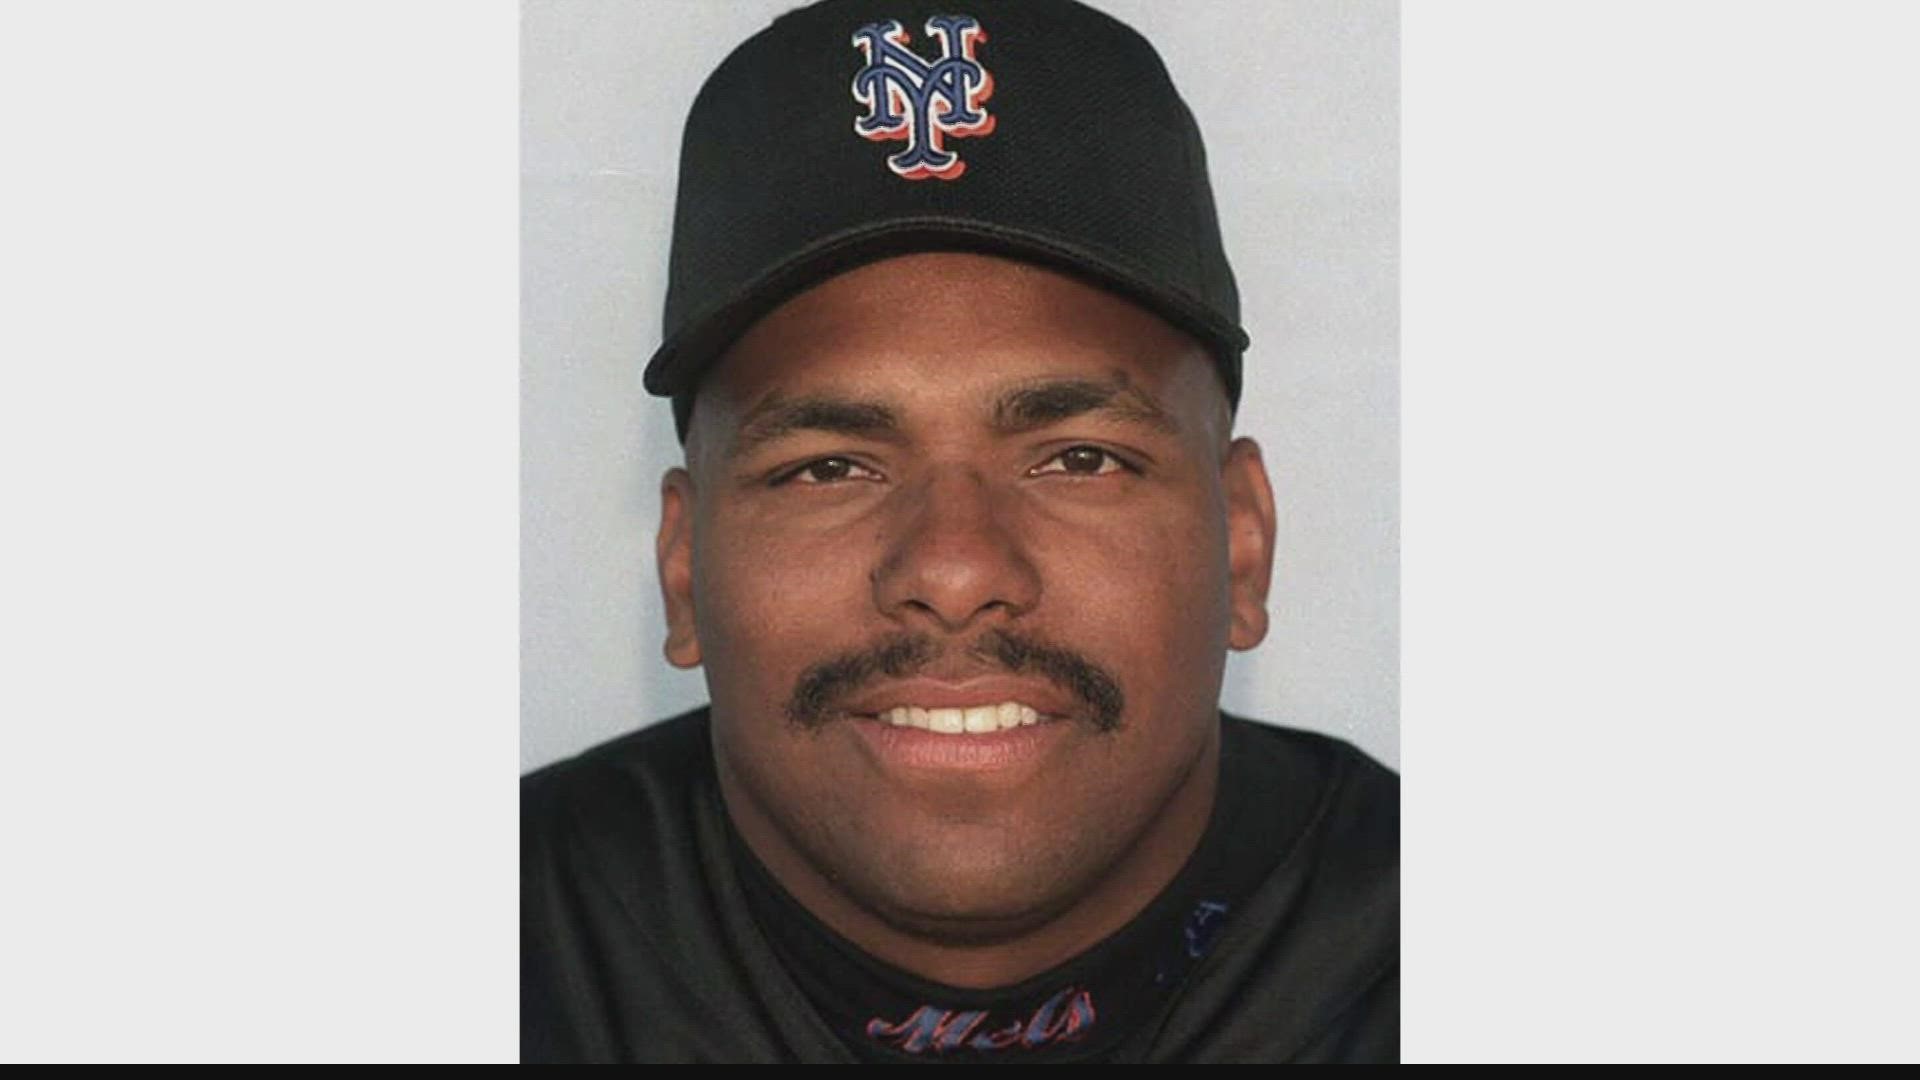 Every July first, Bobby Bonilla cashes in.